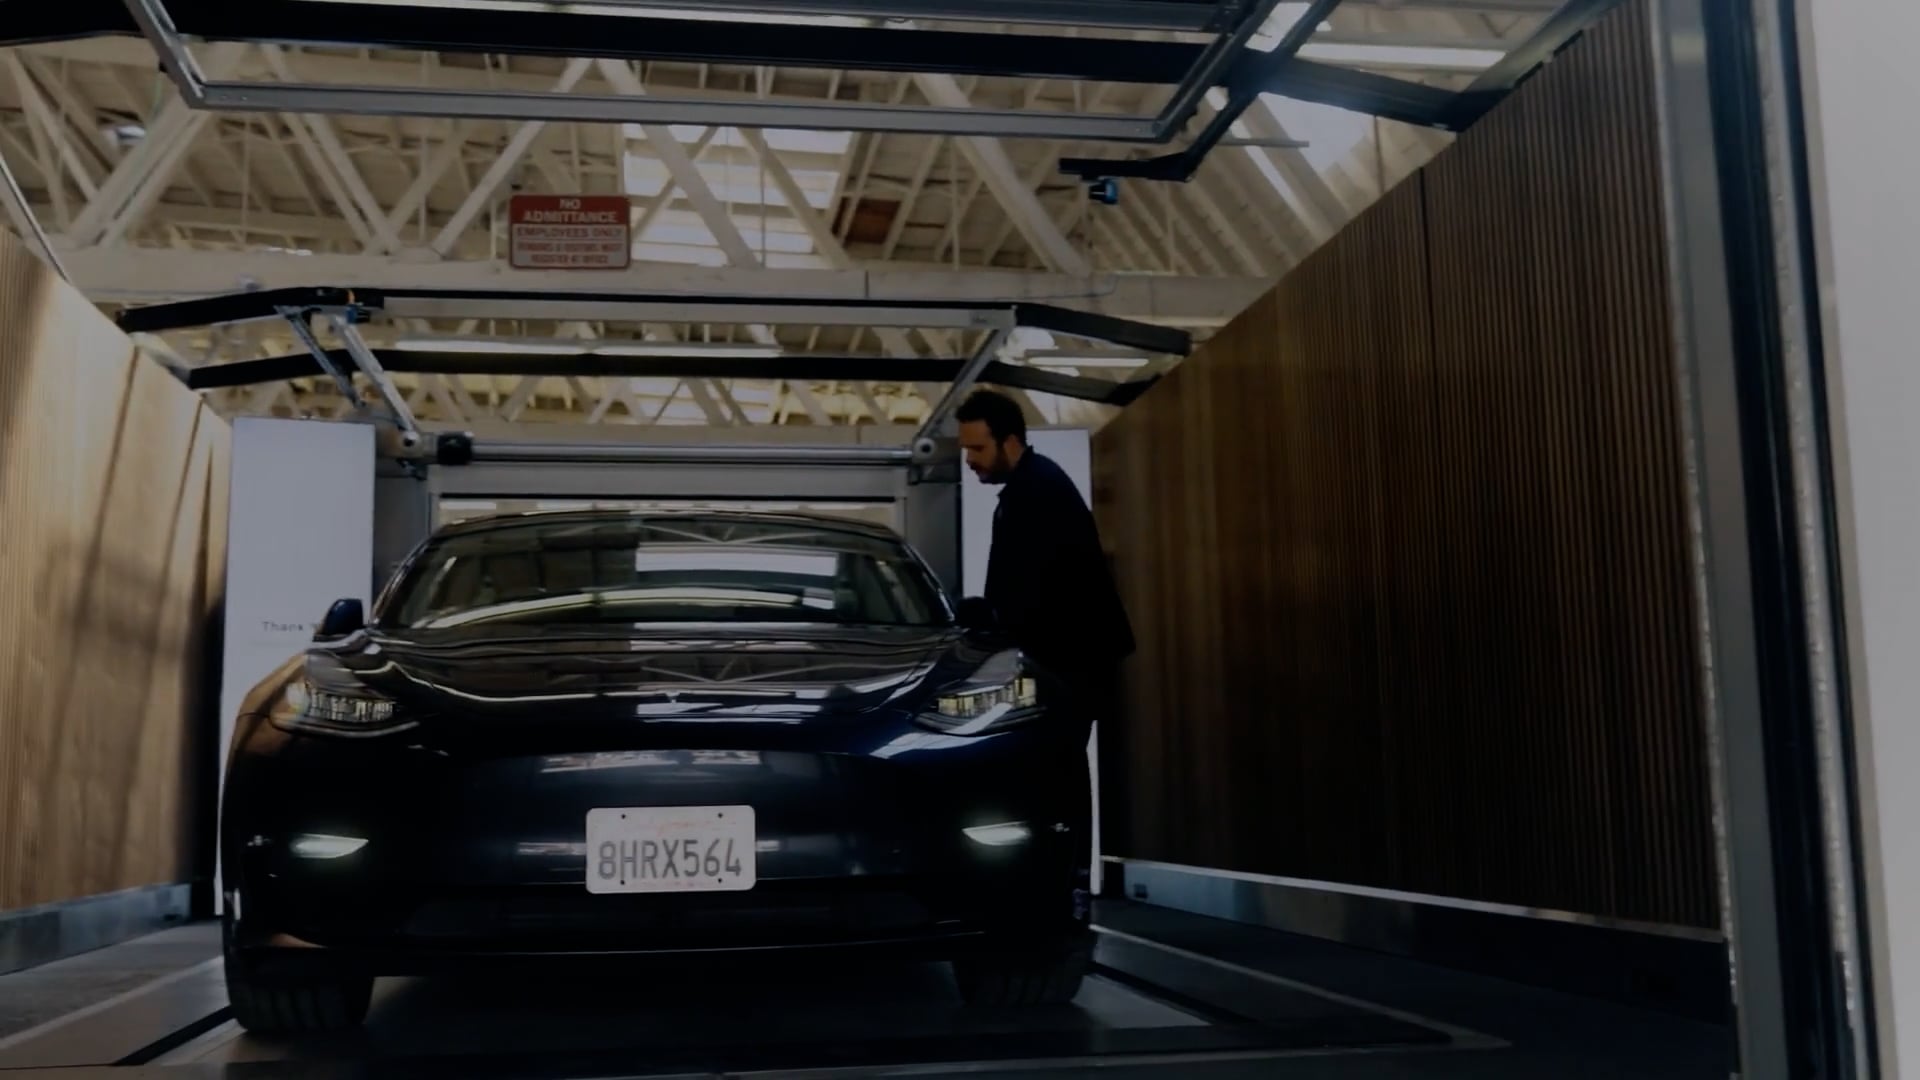 A man in a dark suit stands beside a dark colored car in Volley Automation parking bay with overhead guide rails, in a garage-like setting.